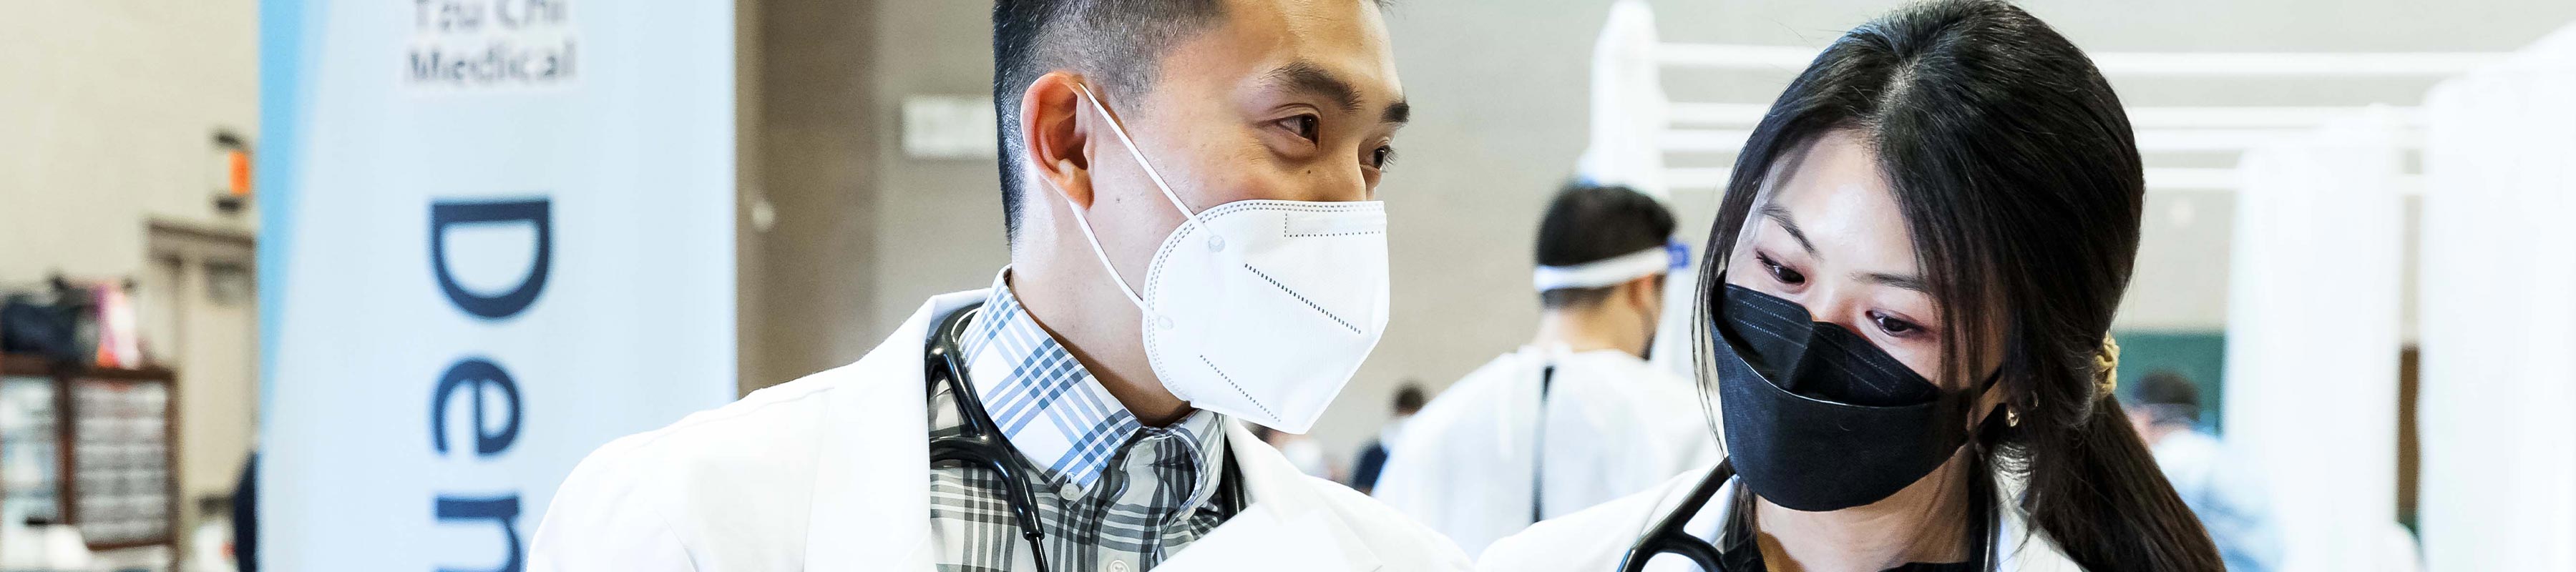 Two masked students conversing in their white coats at a community healthcare event.